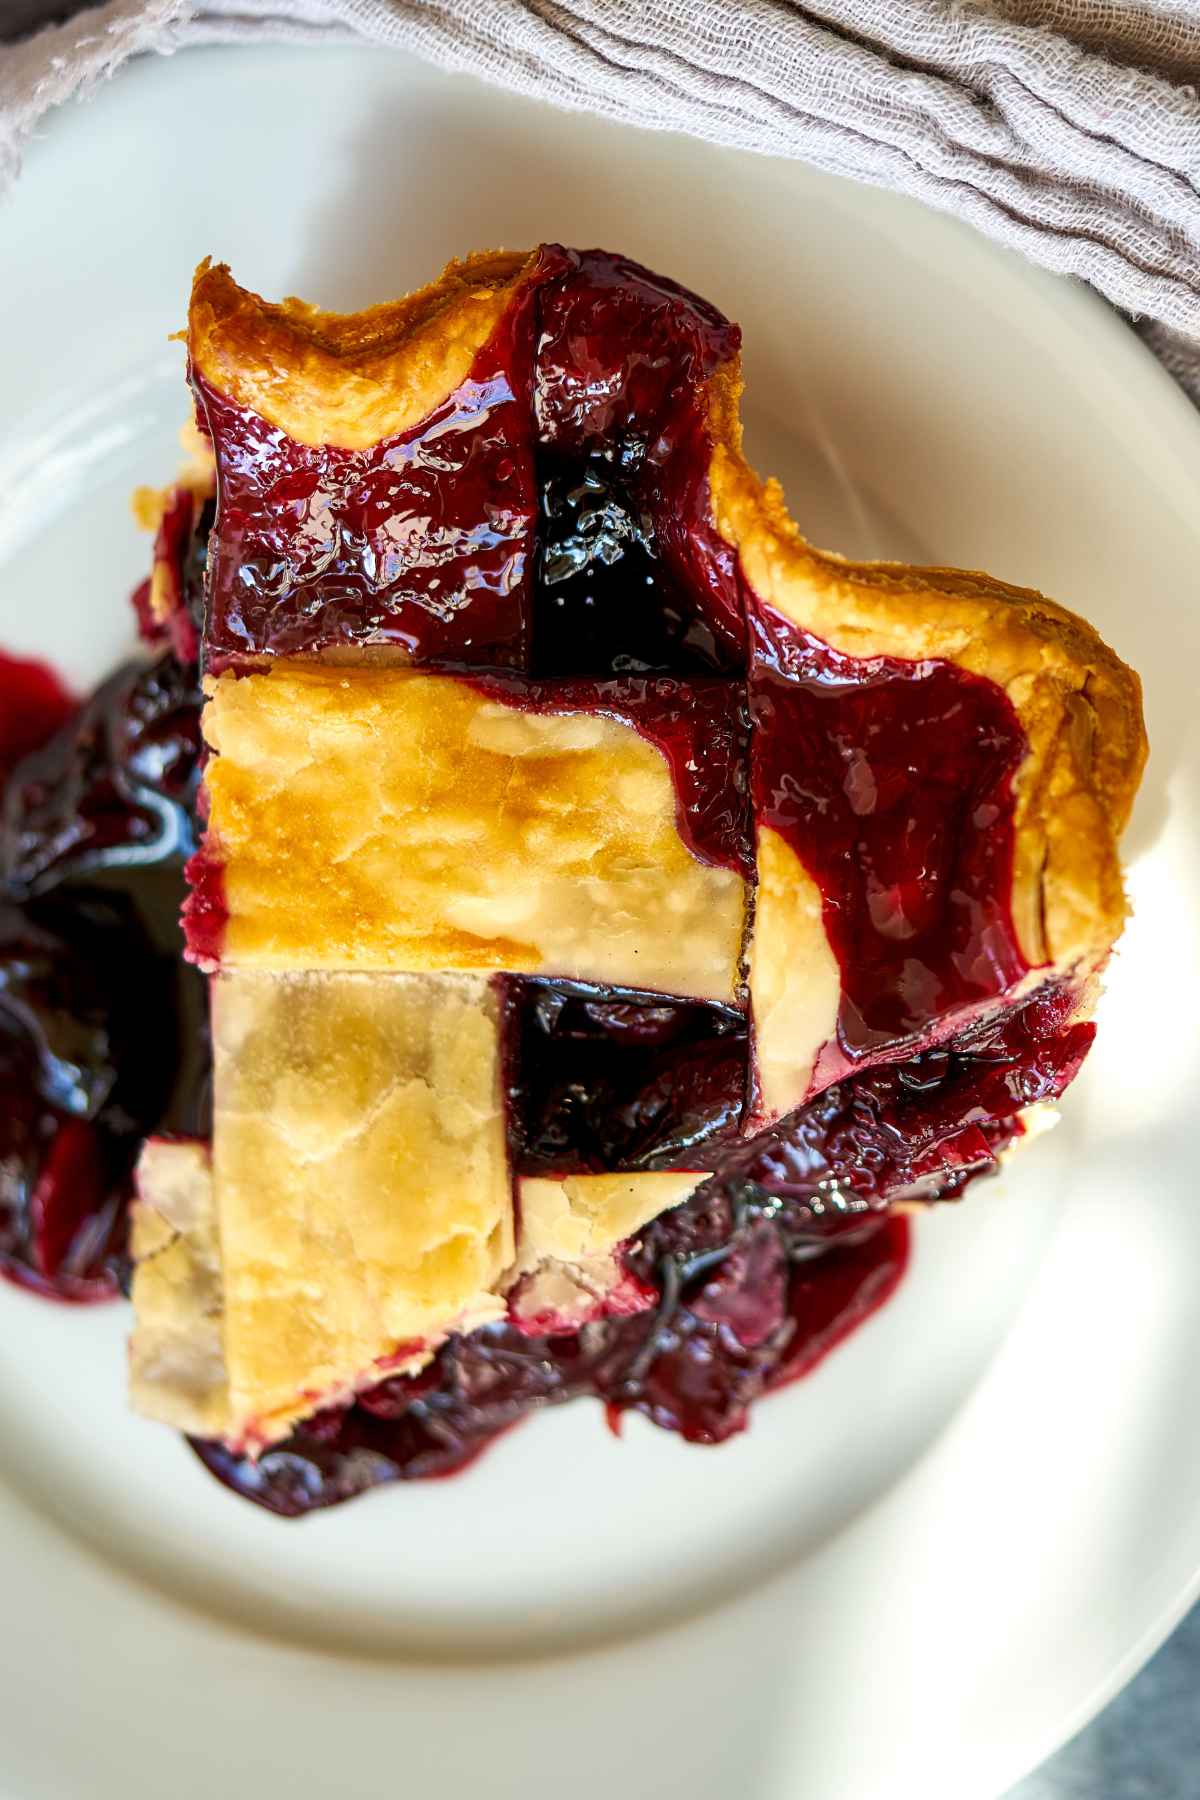 Top view of a slice of cherry pie.